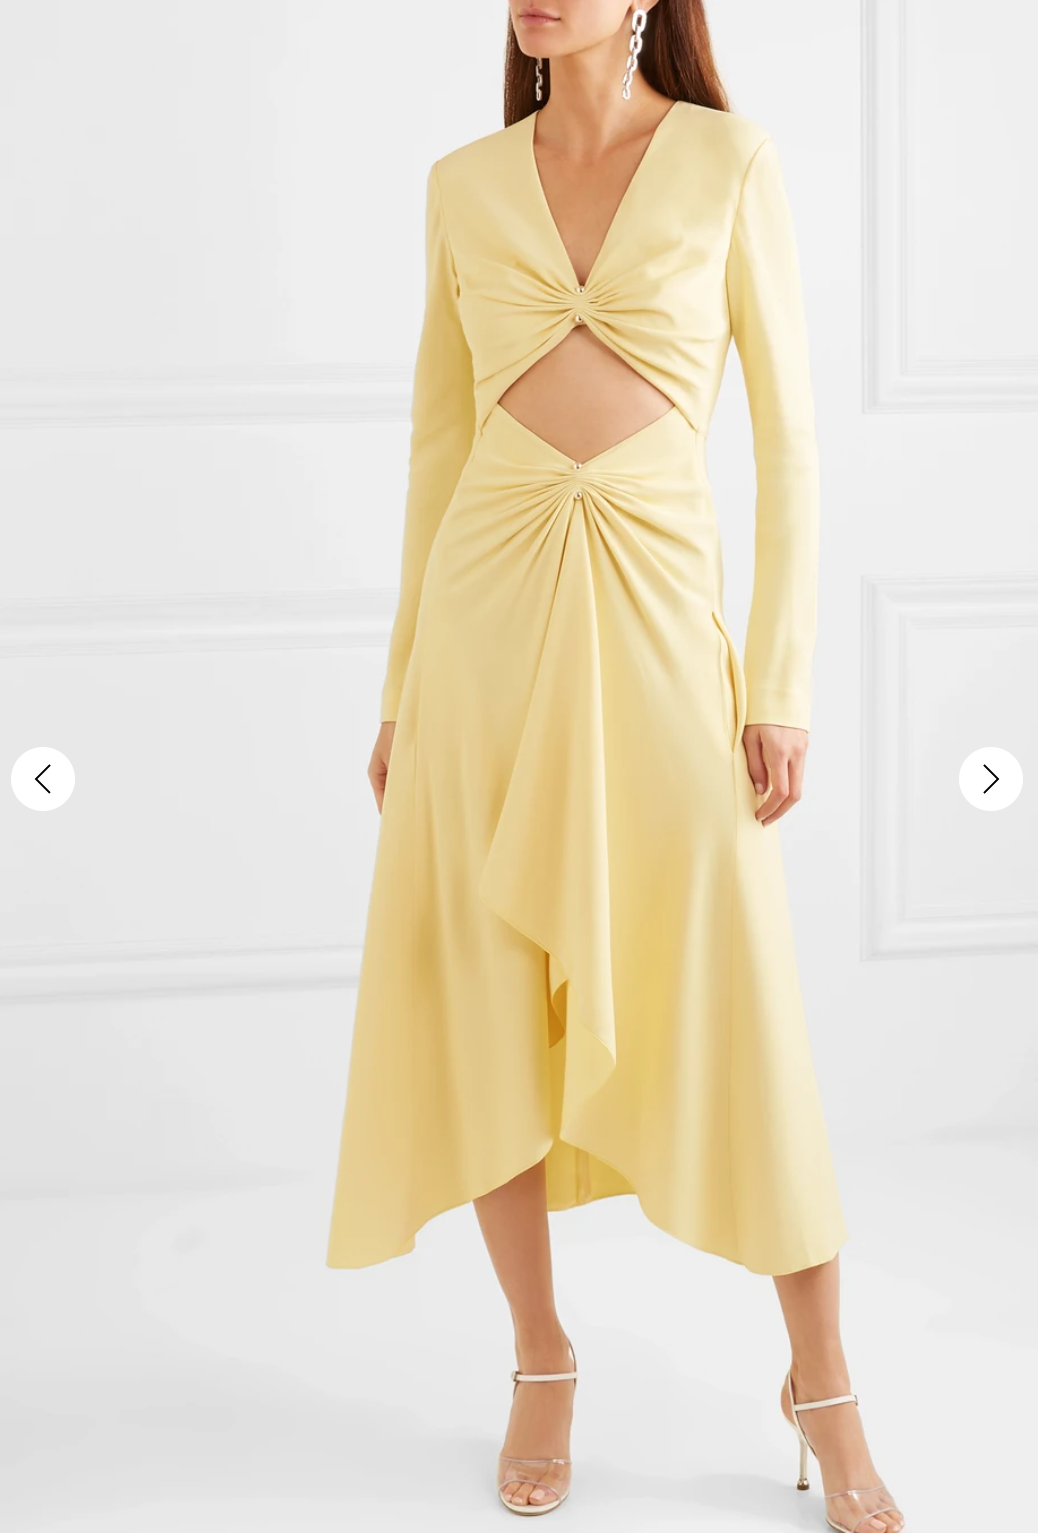 Dion Lee cutout dress - resized.PNG